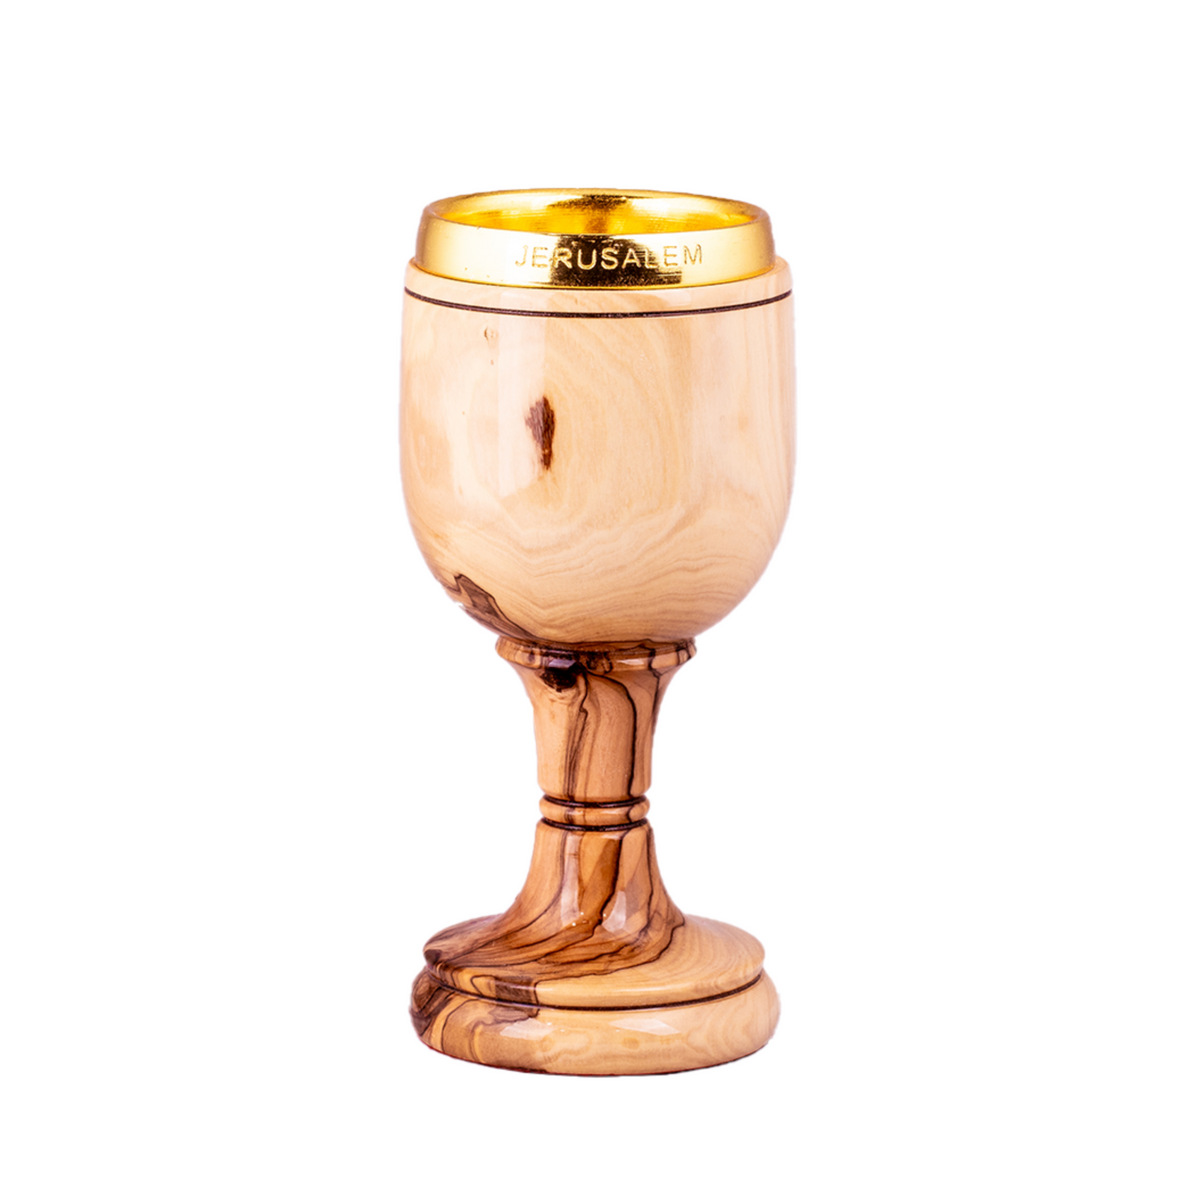 Communion Chalice, Gold-plated Lining, Size: 8.5" / 21 cm height - Blest Art, Inc. 